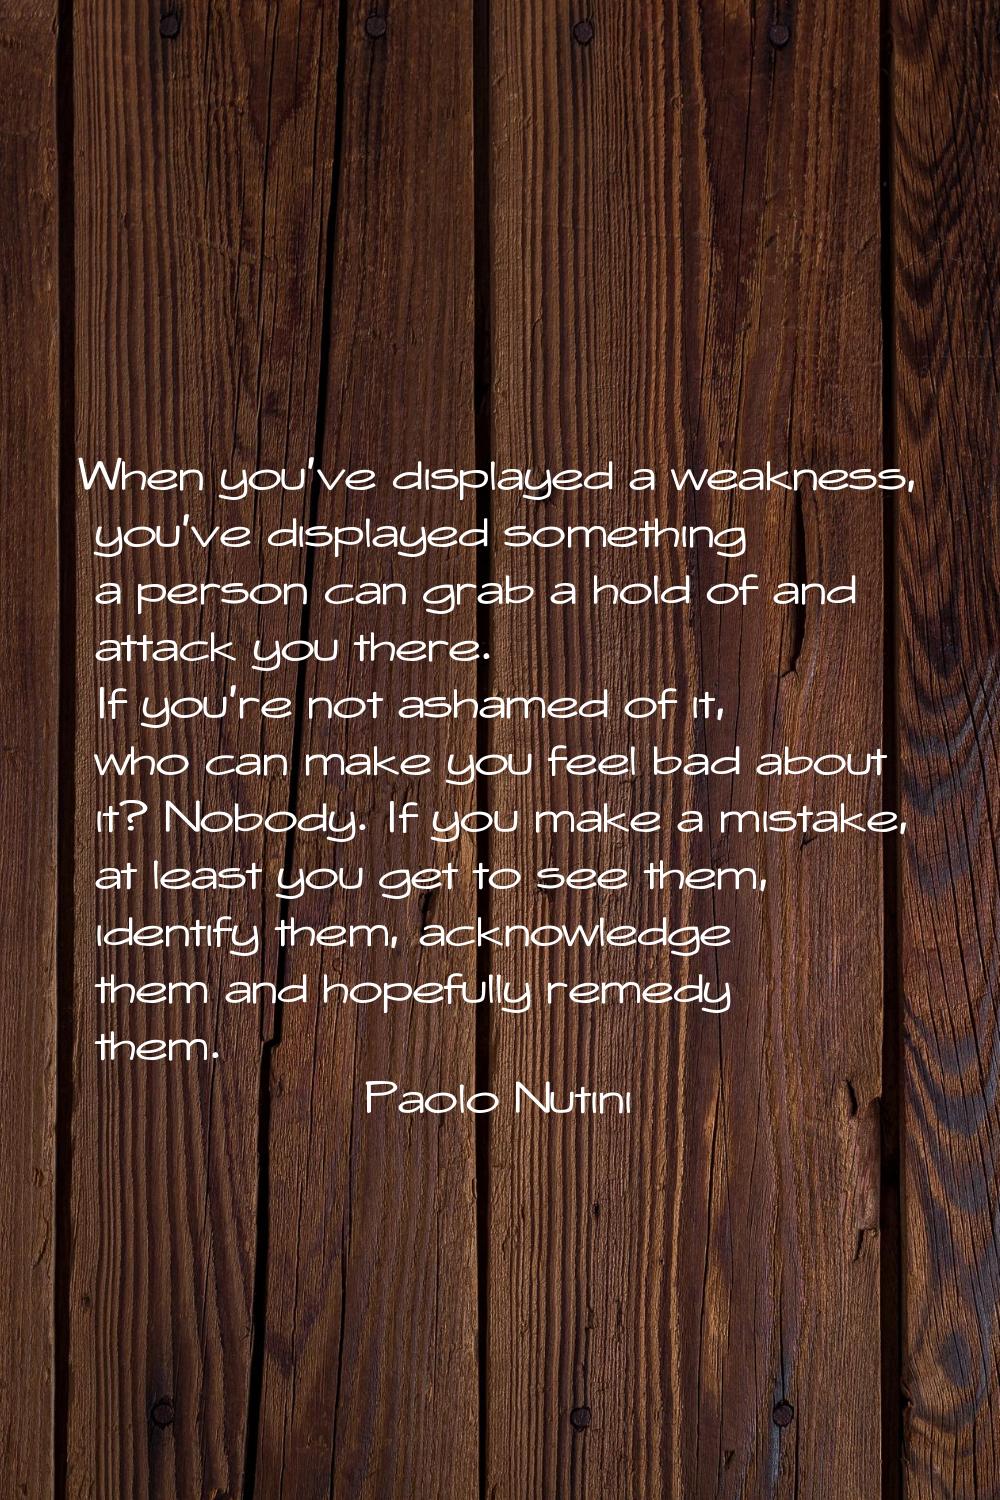 When you've displayed a weakness, you've displayed something a person can grab a hold of and attack